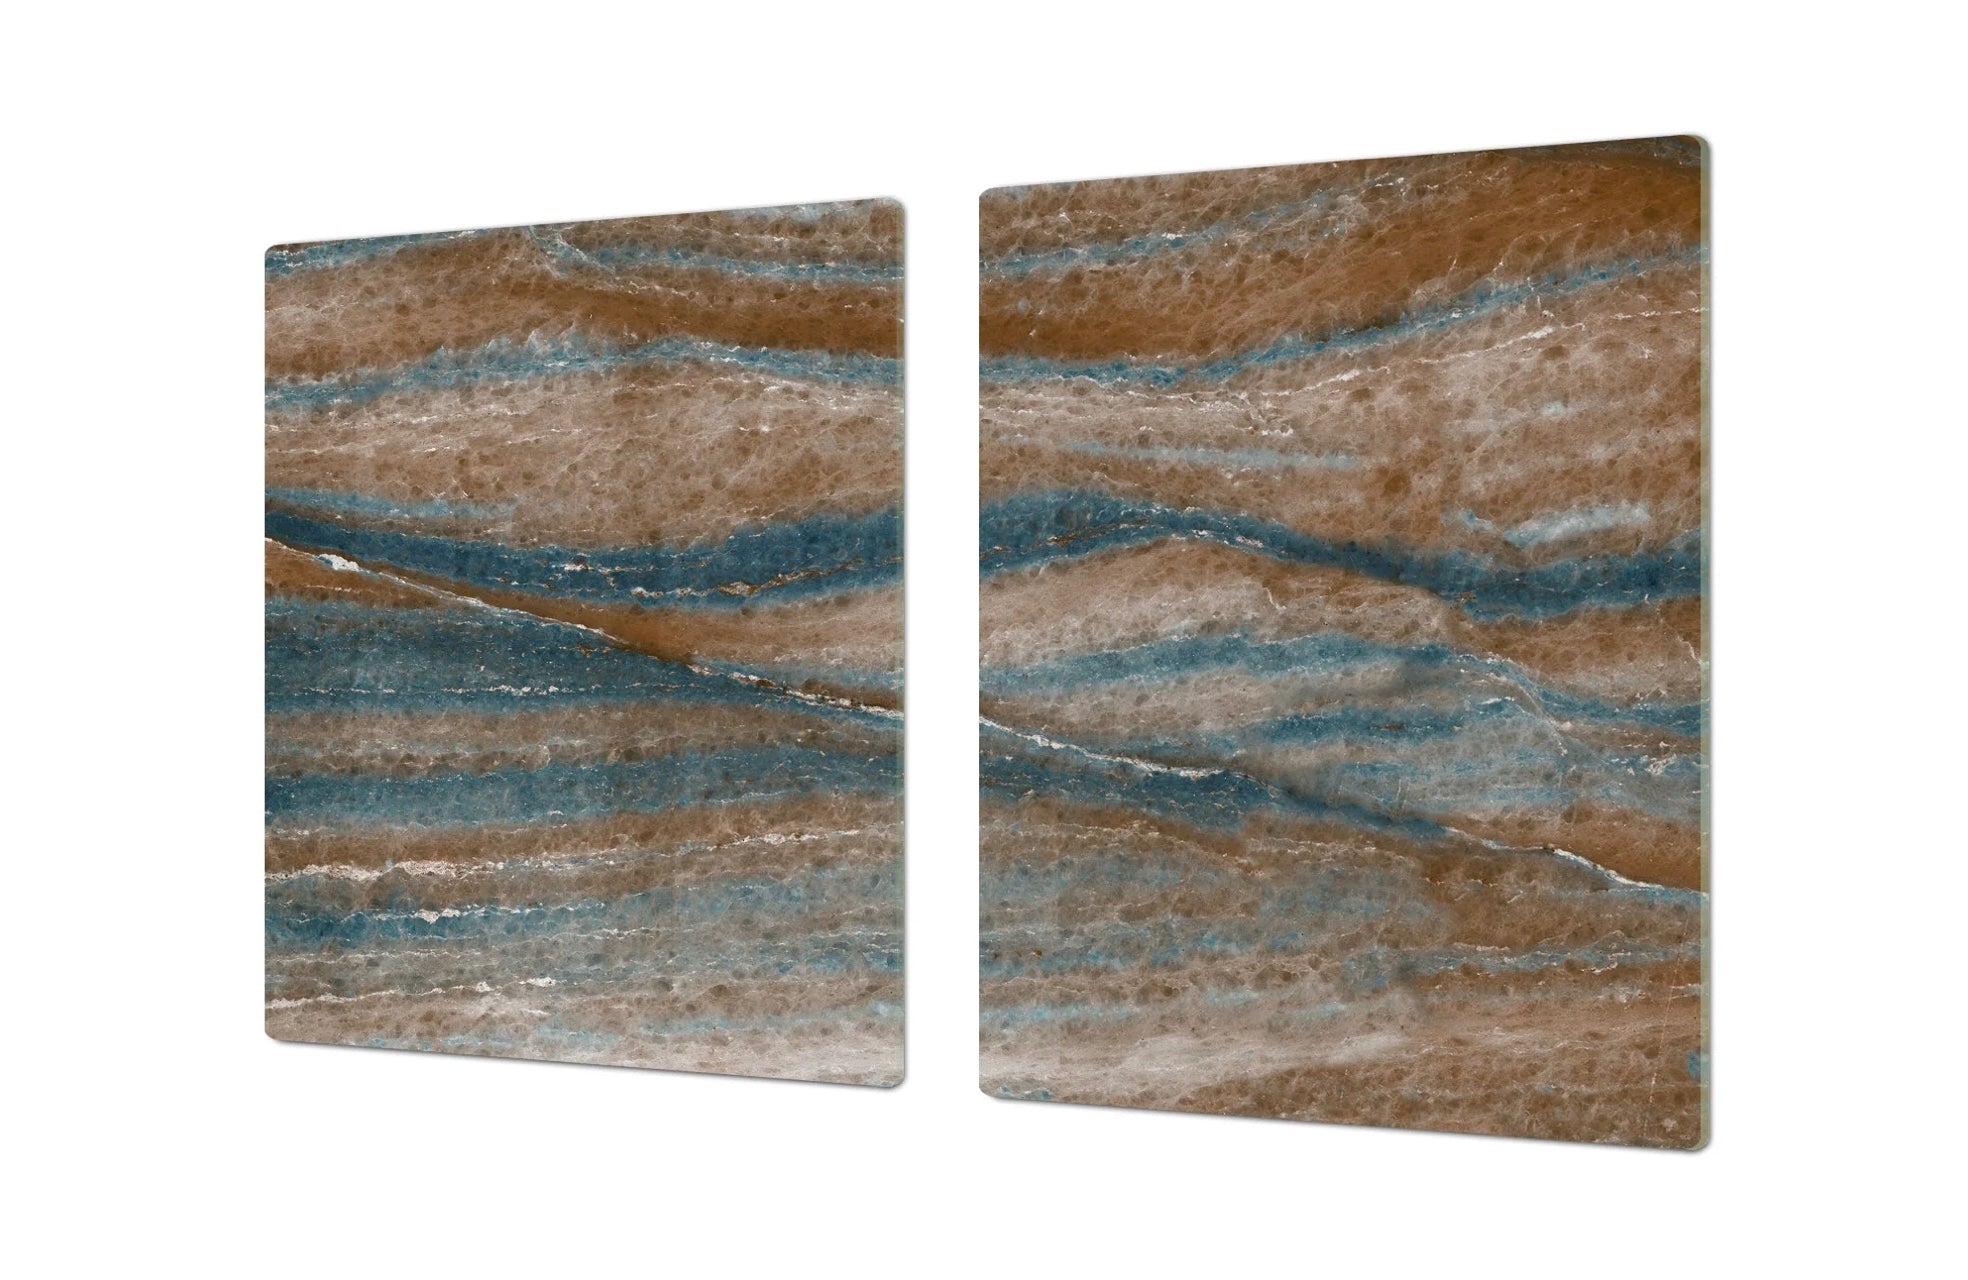 Stove Top Cover - Brown and Blue Stone Marble Style Tempered Glass